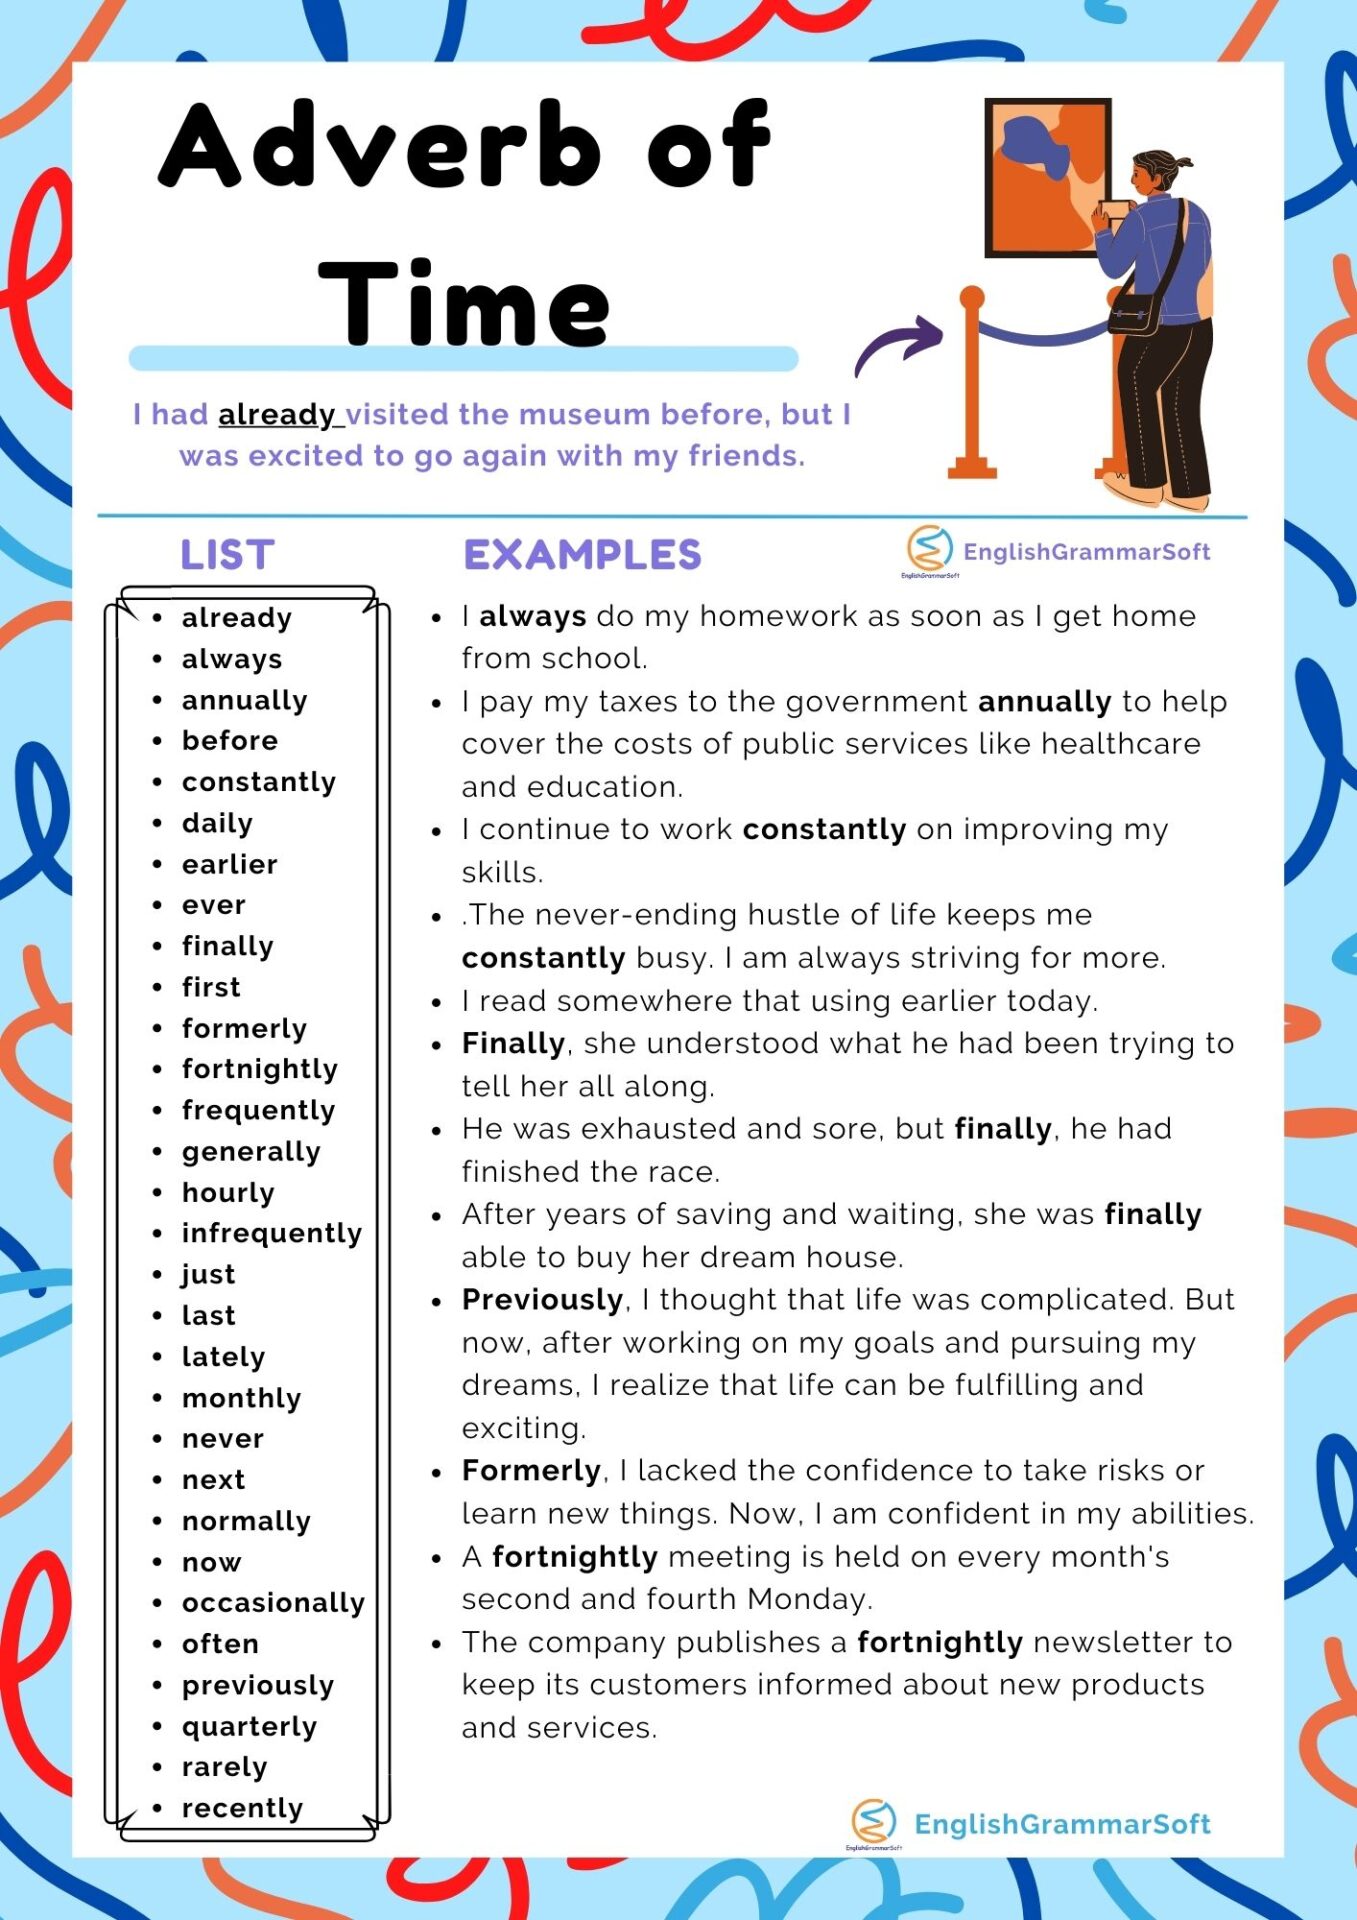 Adverb of Time Examples & List